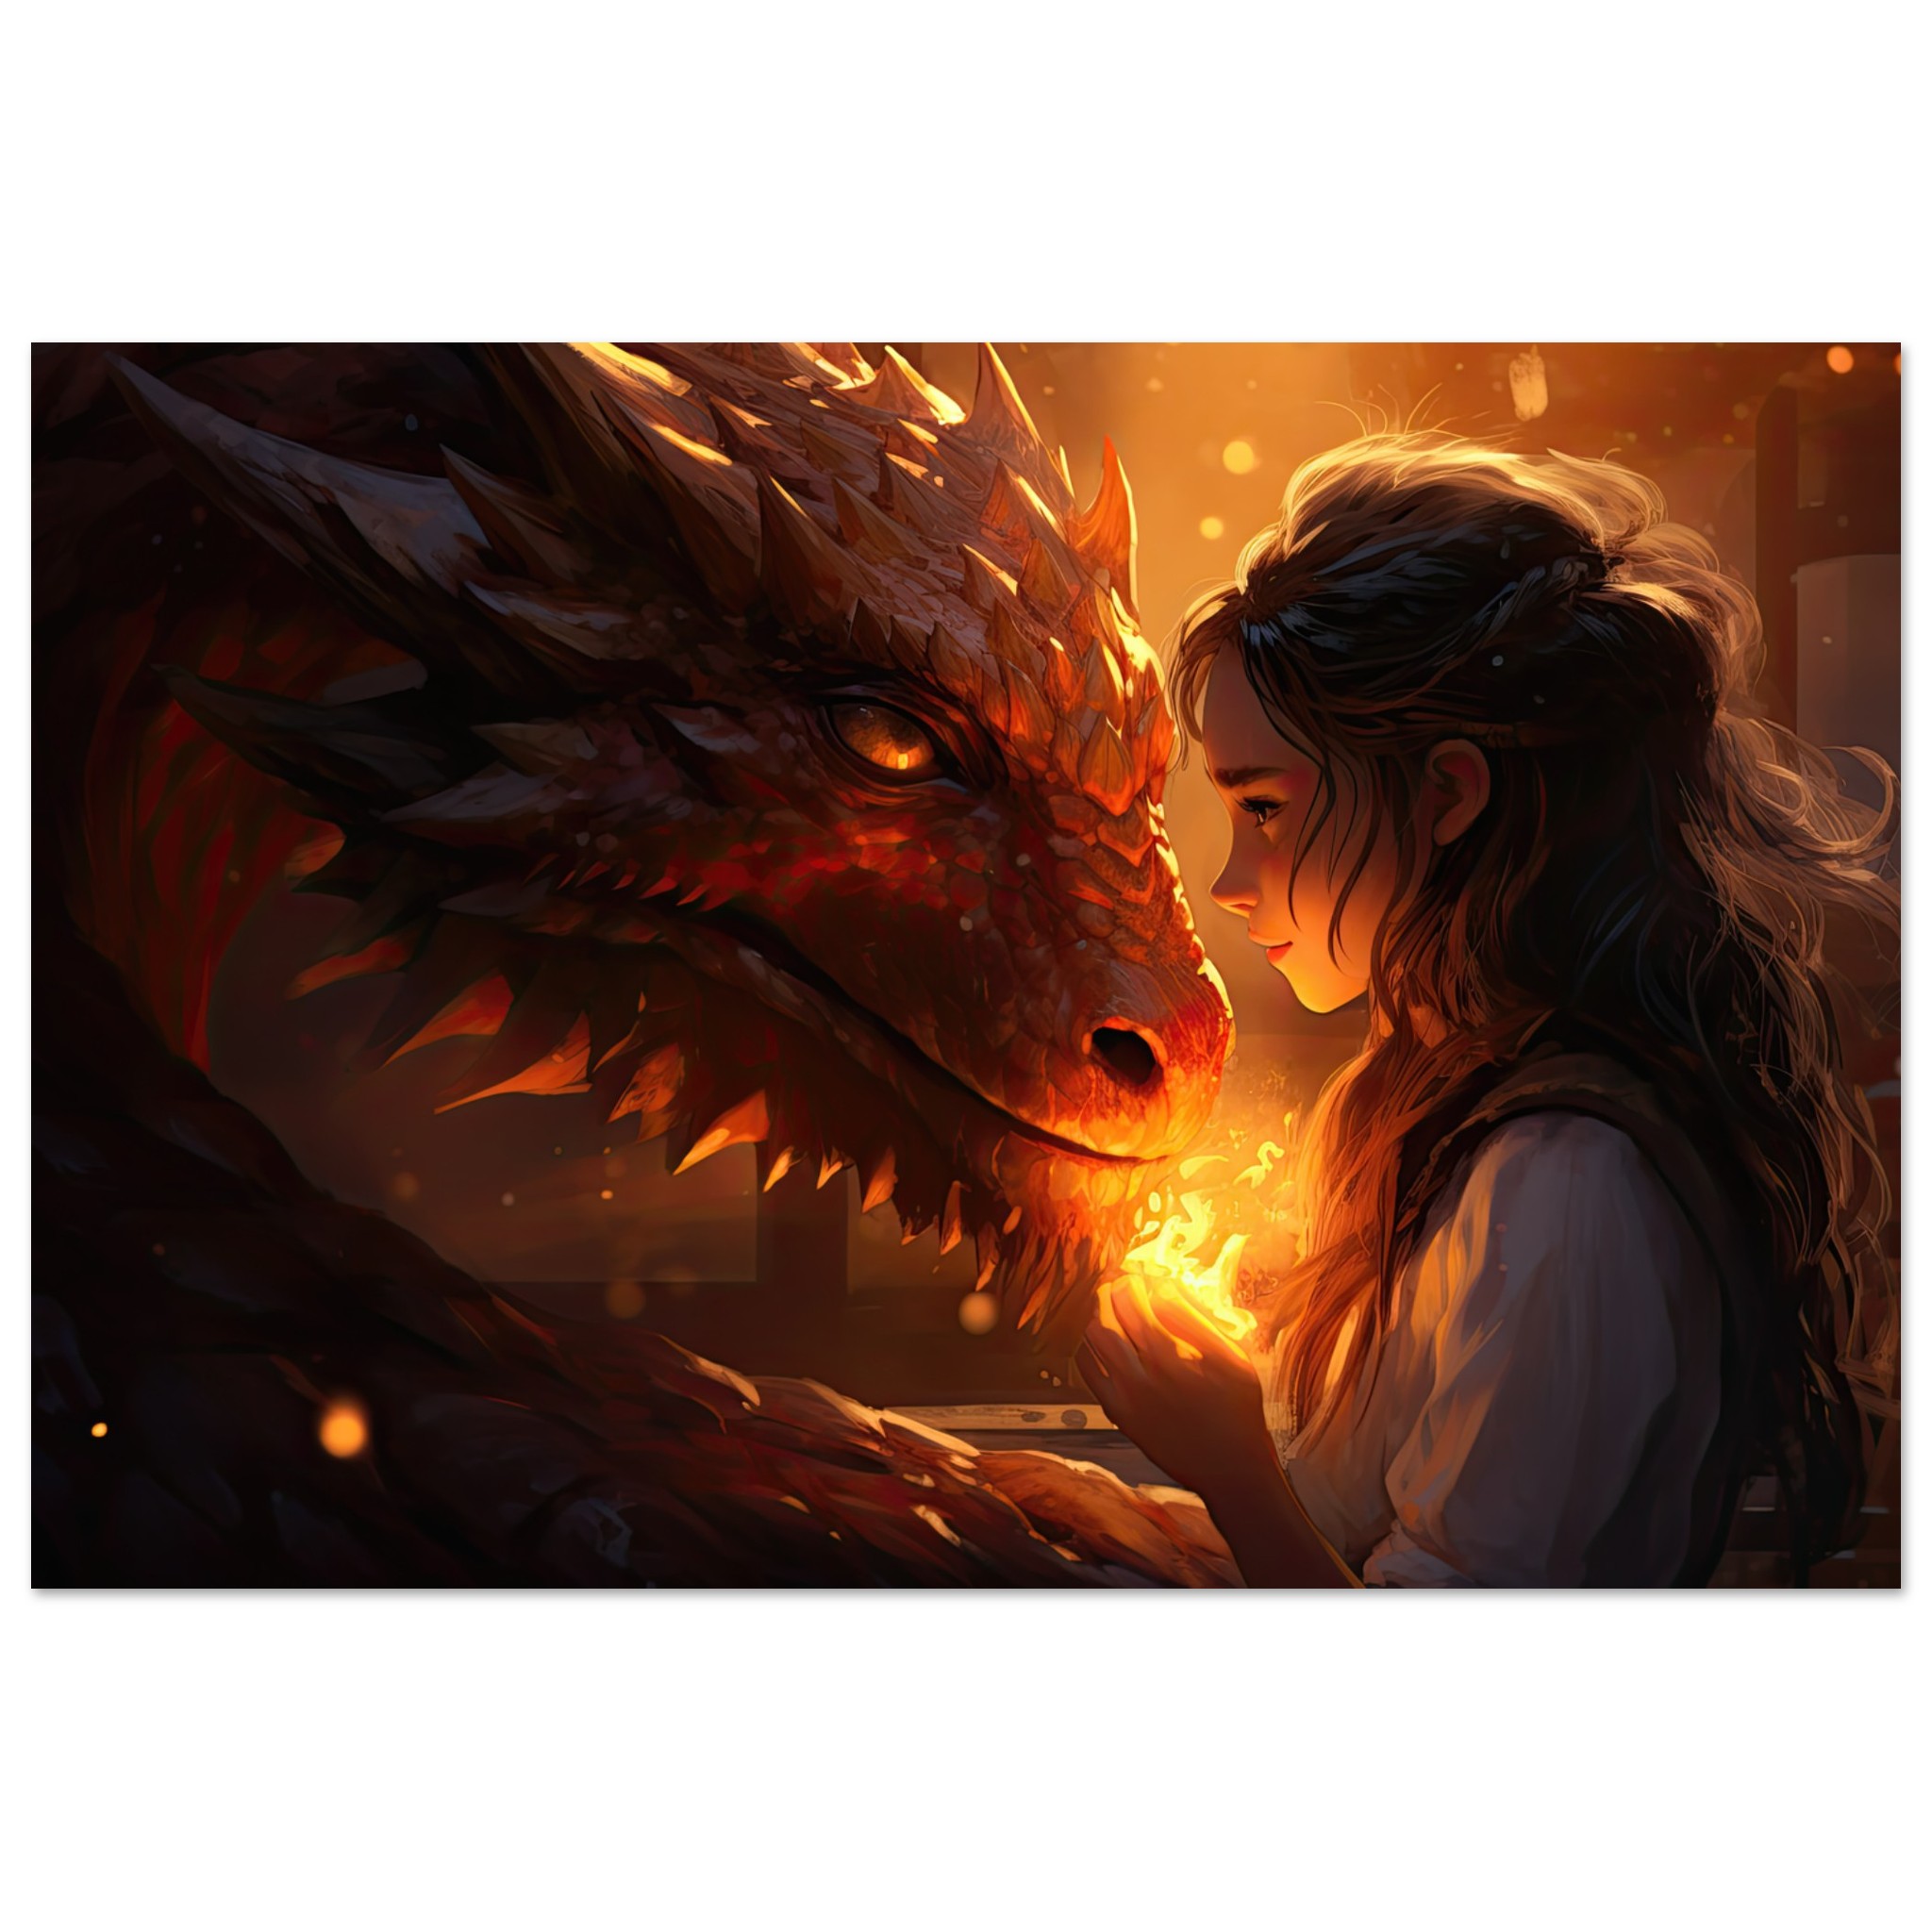 Magical Friendship – Girl and Dragon – Poster